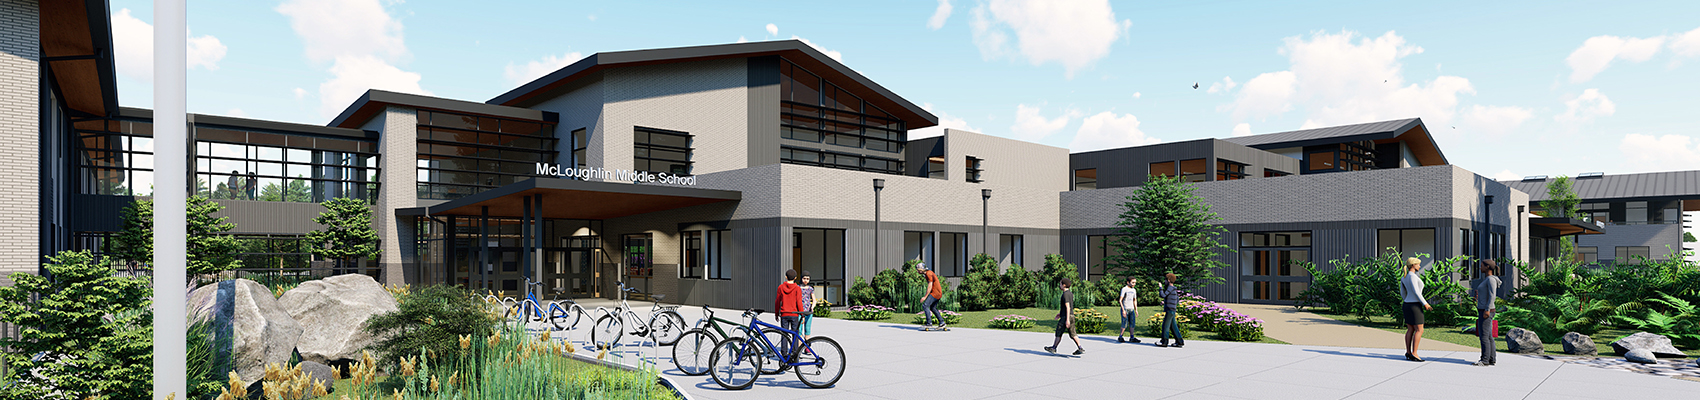 Rendering of the new McLoughlin exterior